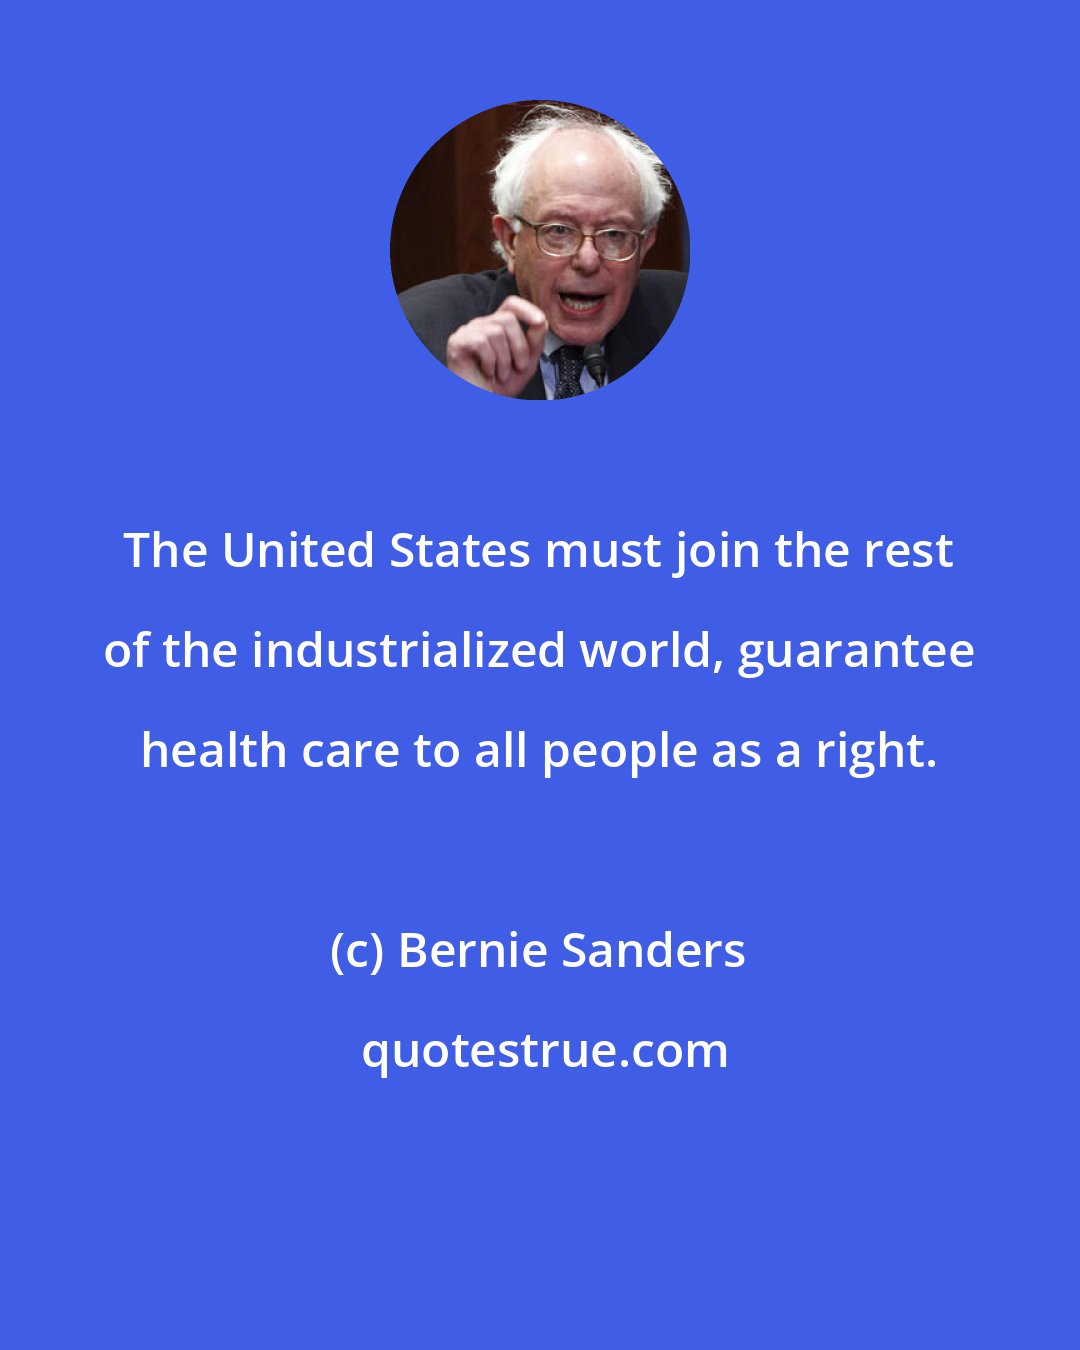 Bernie Sanders: The United States must join the rest of the industrialized world, guarantee health care to all people as a right.